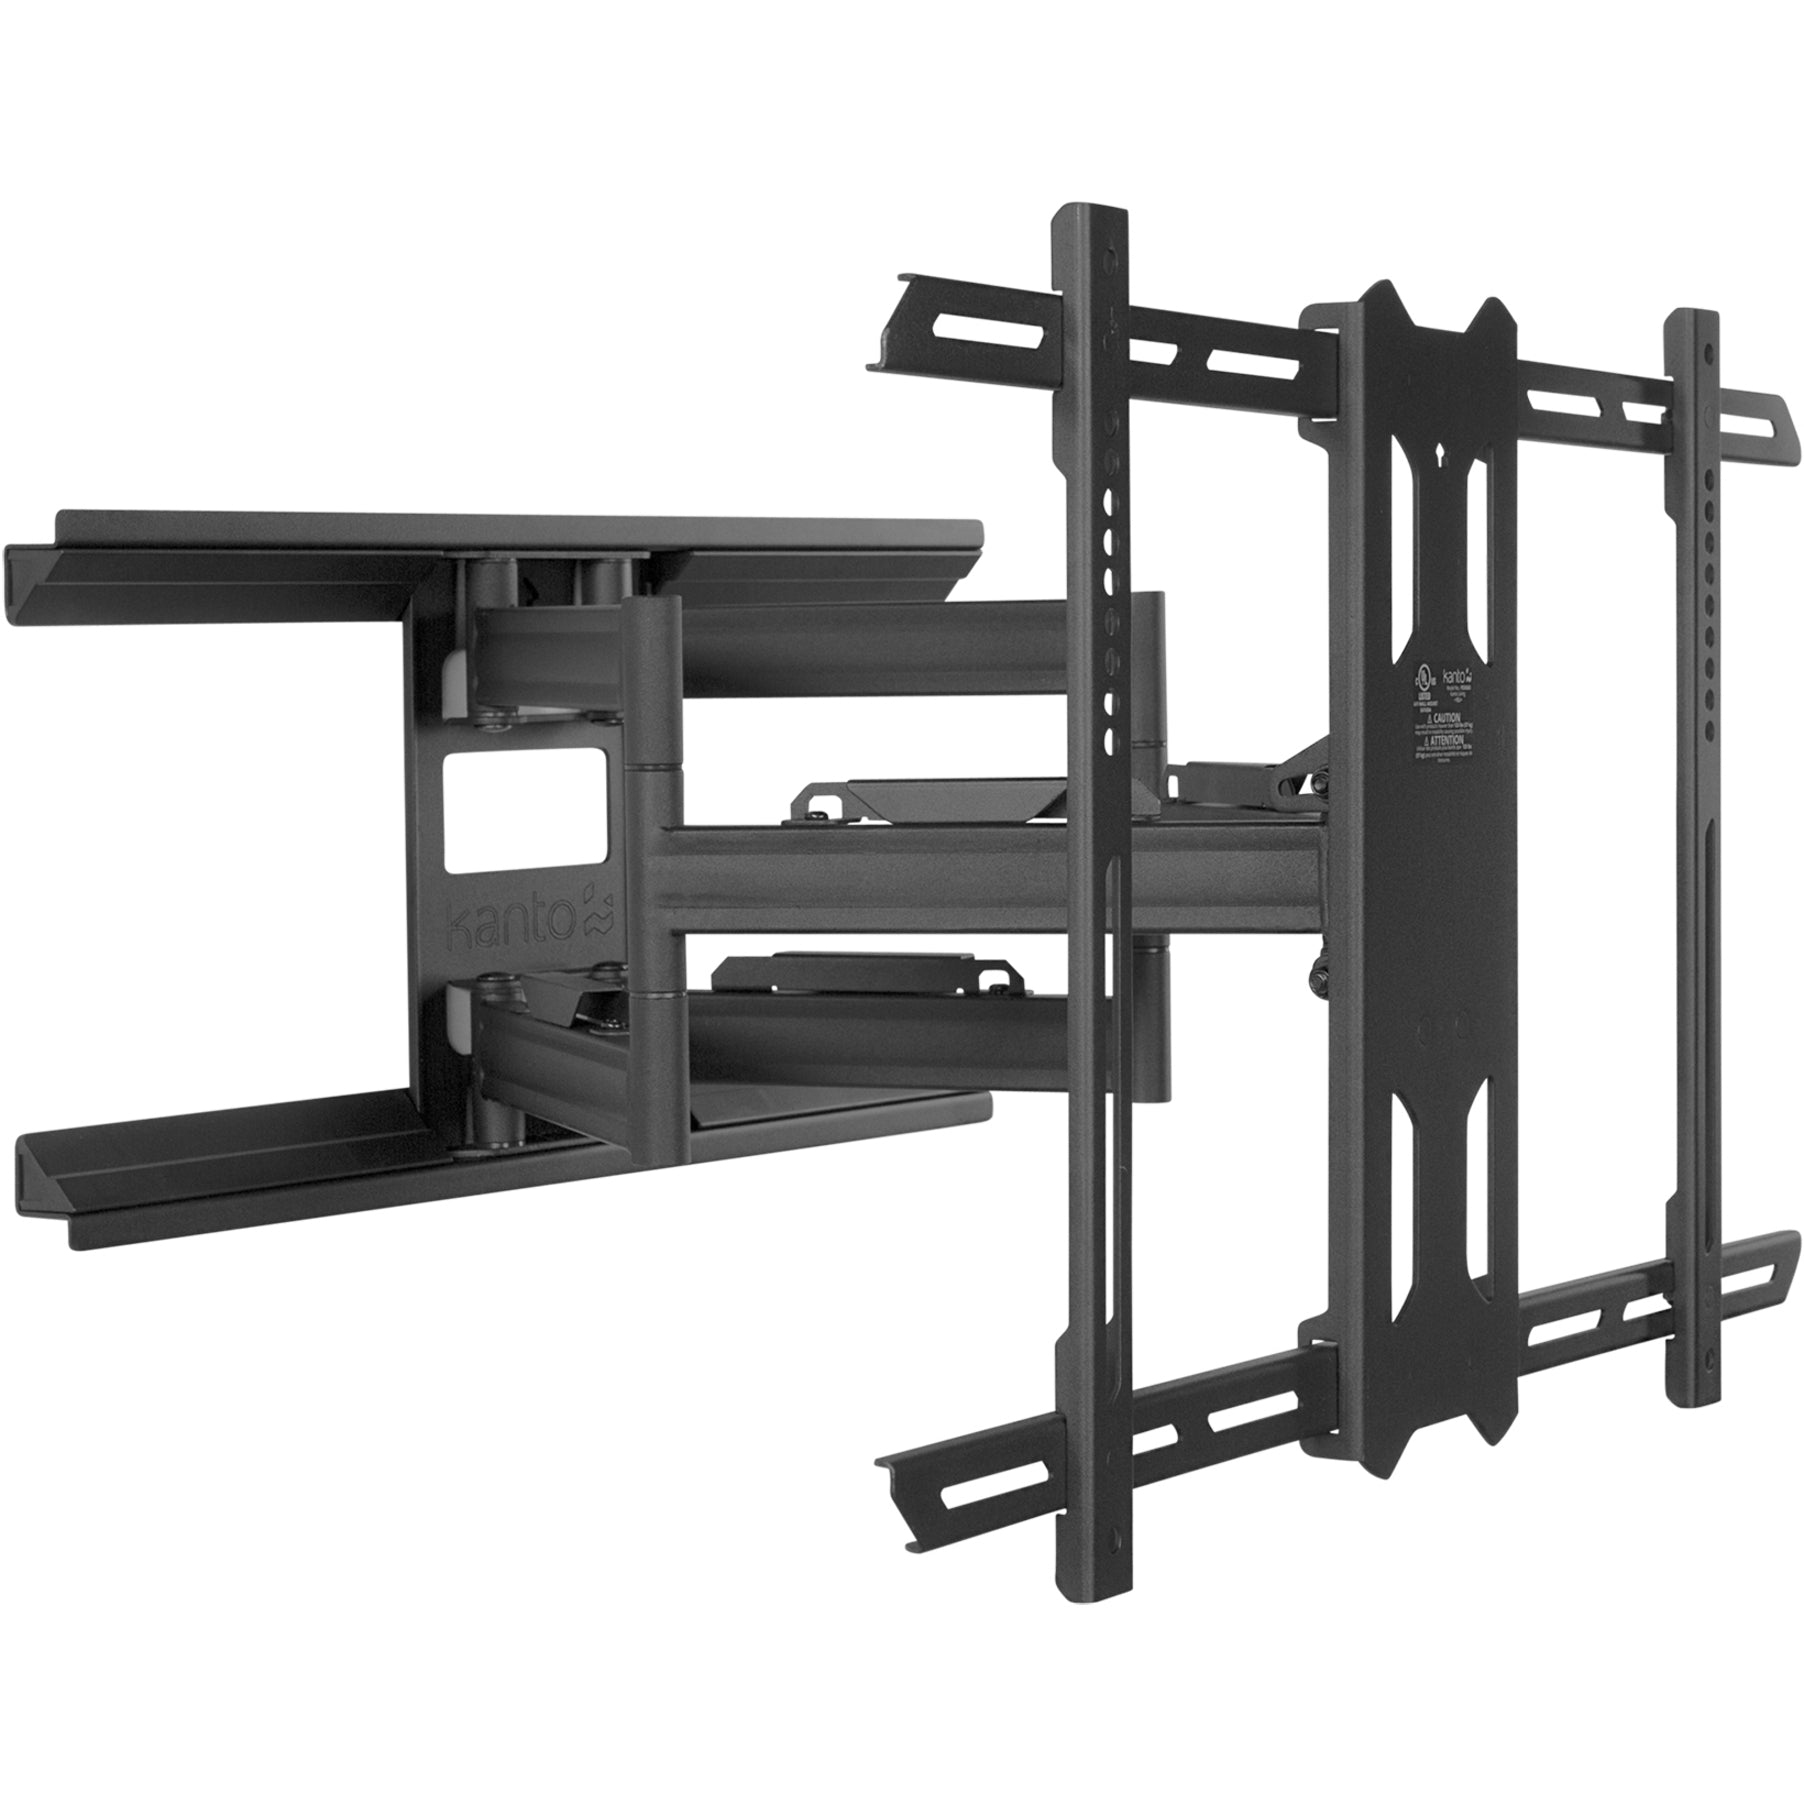 Kanto PDX650 Wall Mount for TV - Black